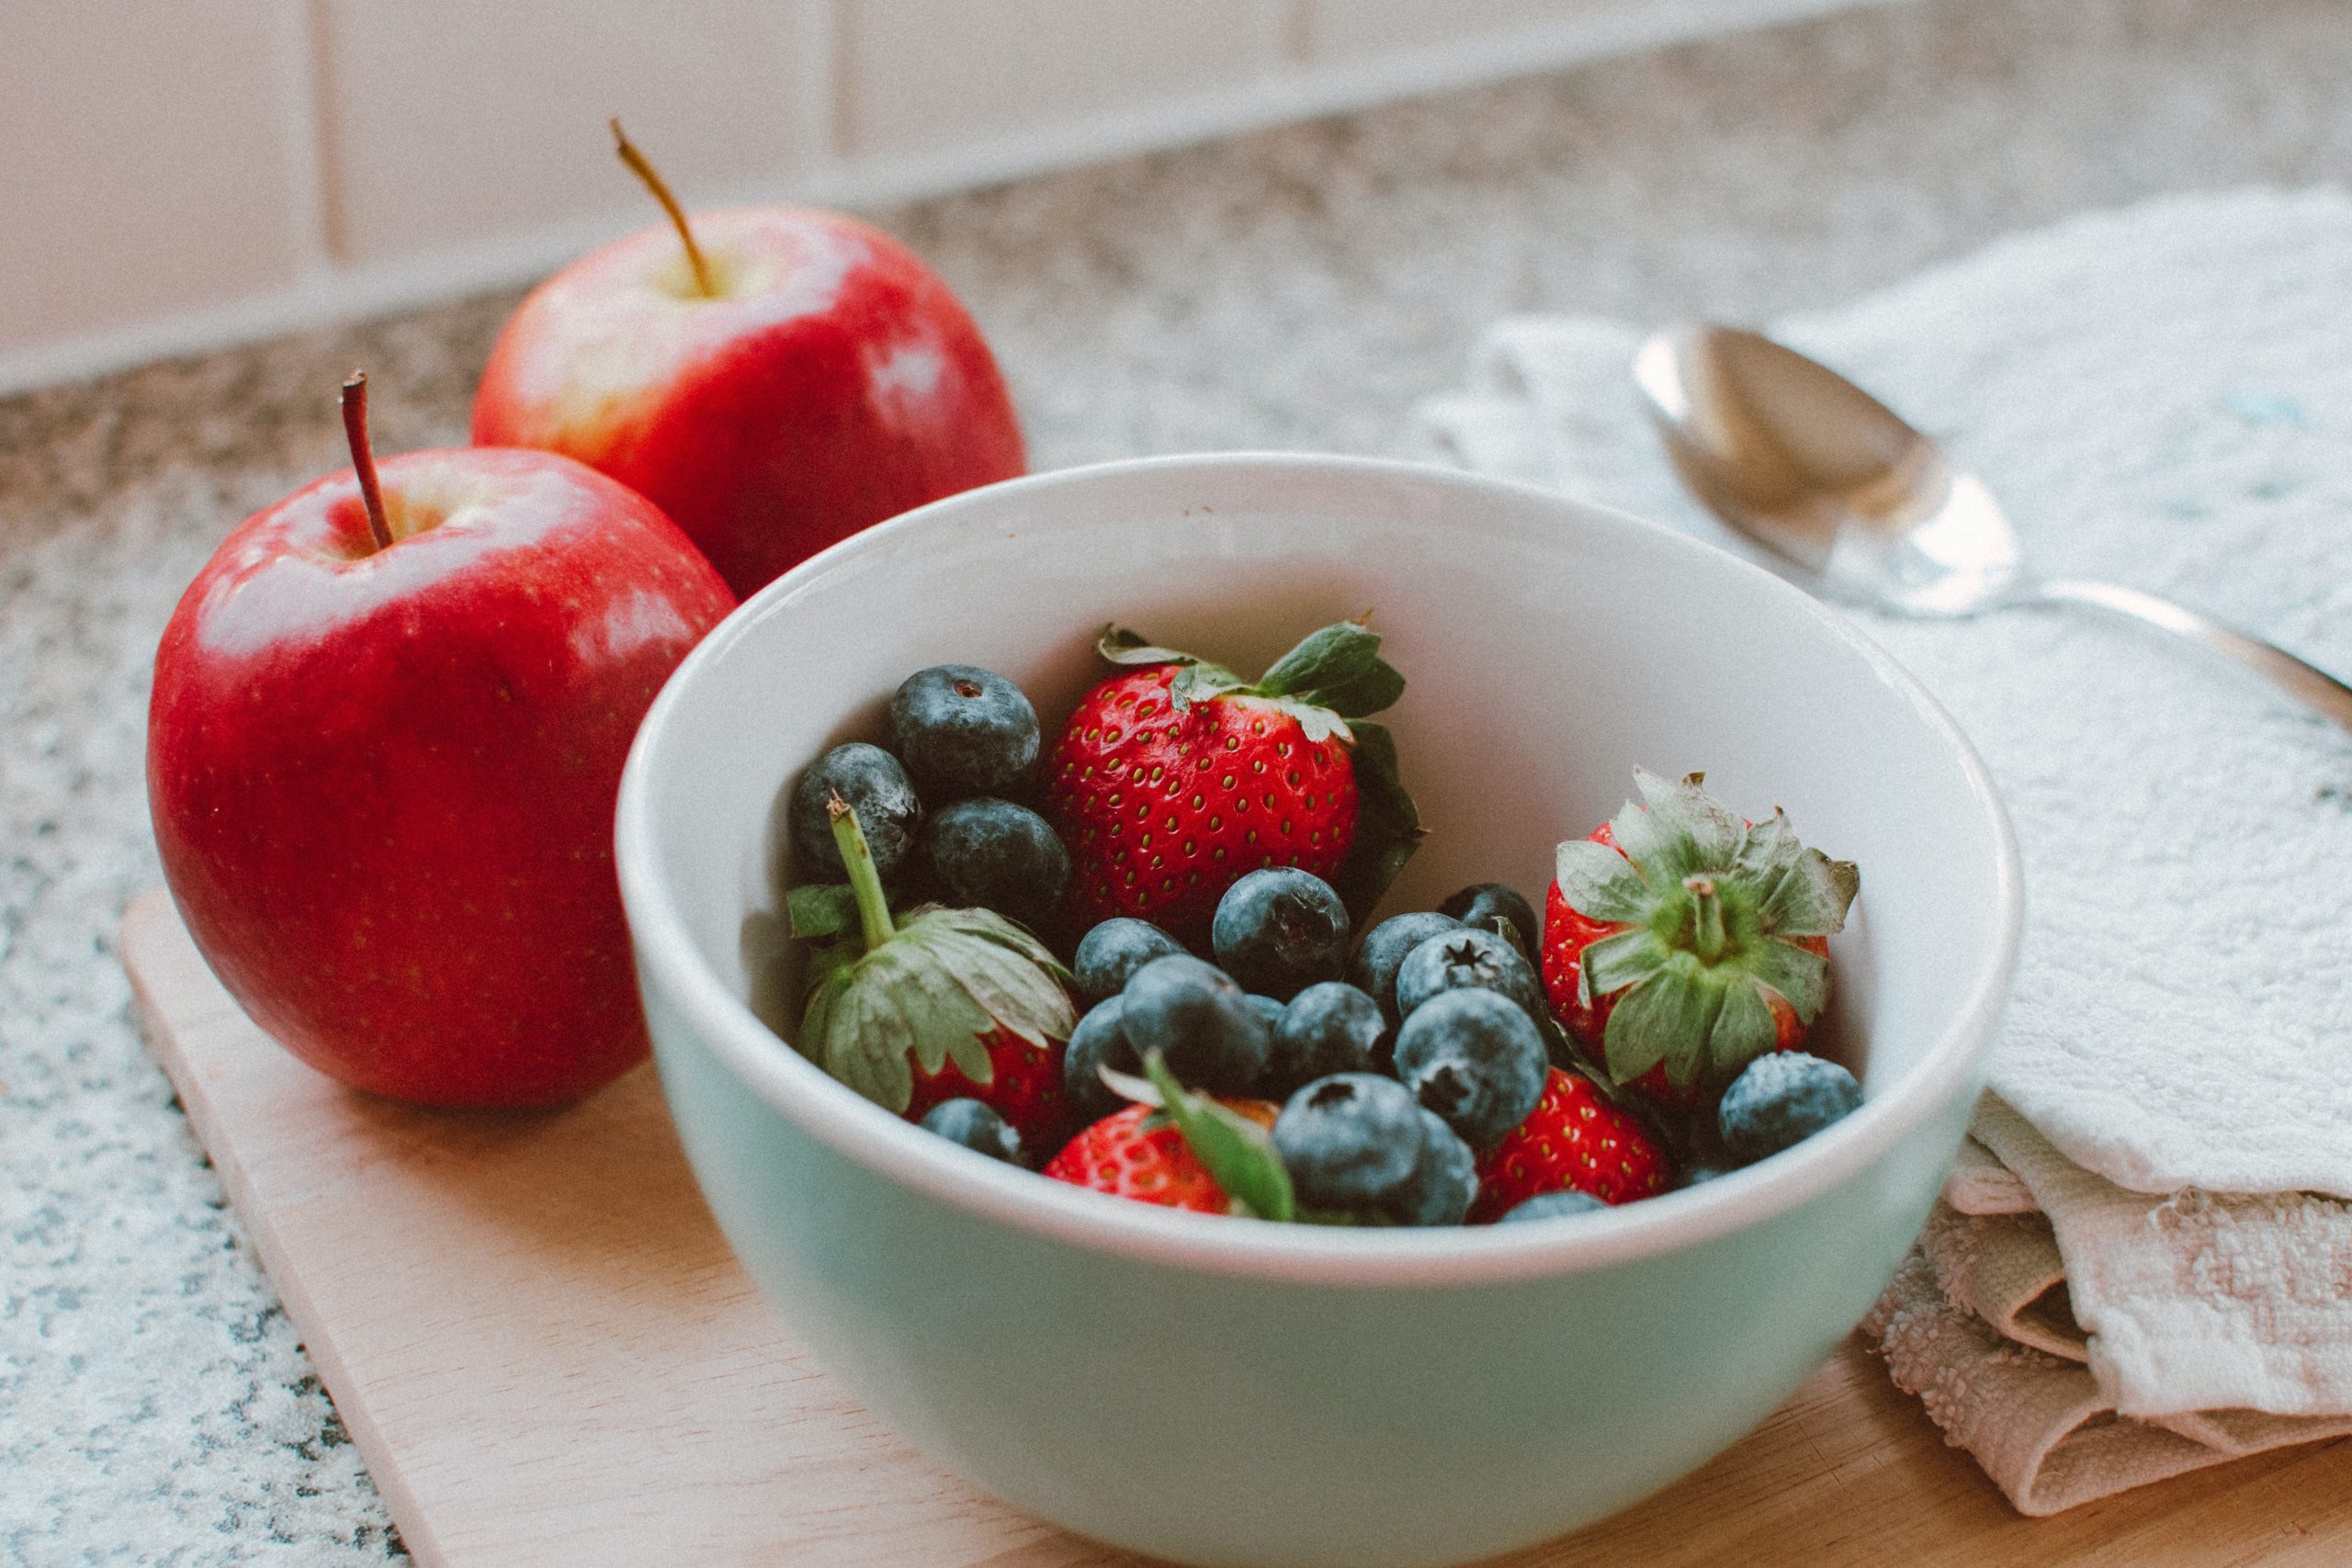 Berries are a cancer fighting food that contain antioxidants. Learn about other foods that fight cancer. #cancerfightingfoods #cancerdiet #cancerprevention, #cancerscreening, #breastcancerprevention, #fightcancer, #anticancerfoods